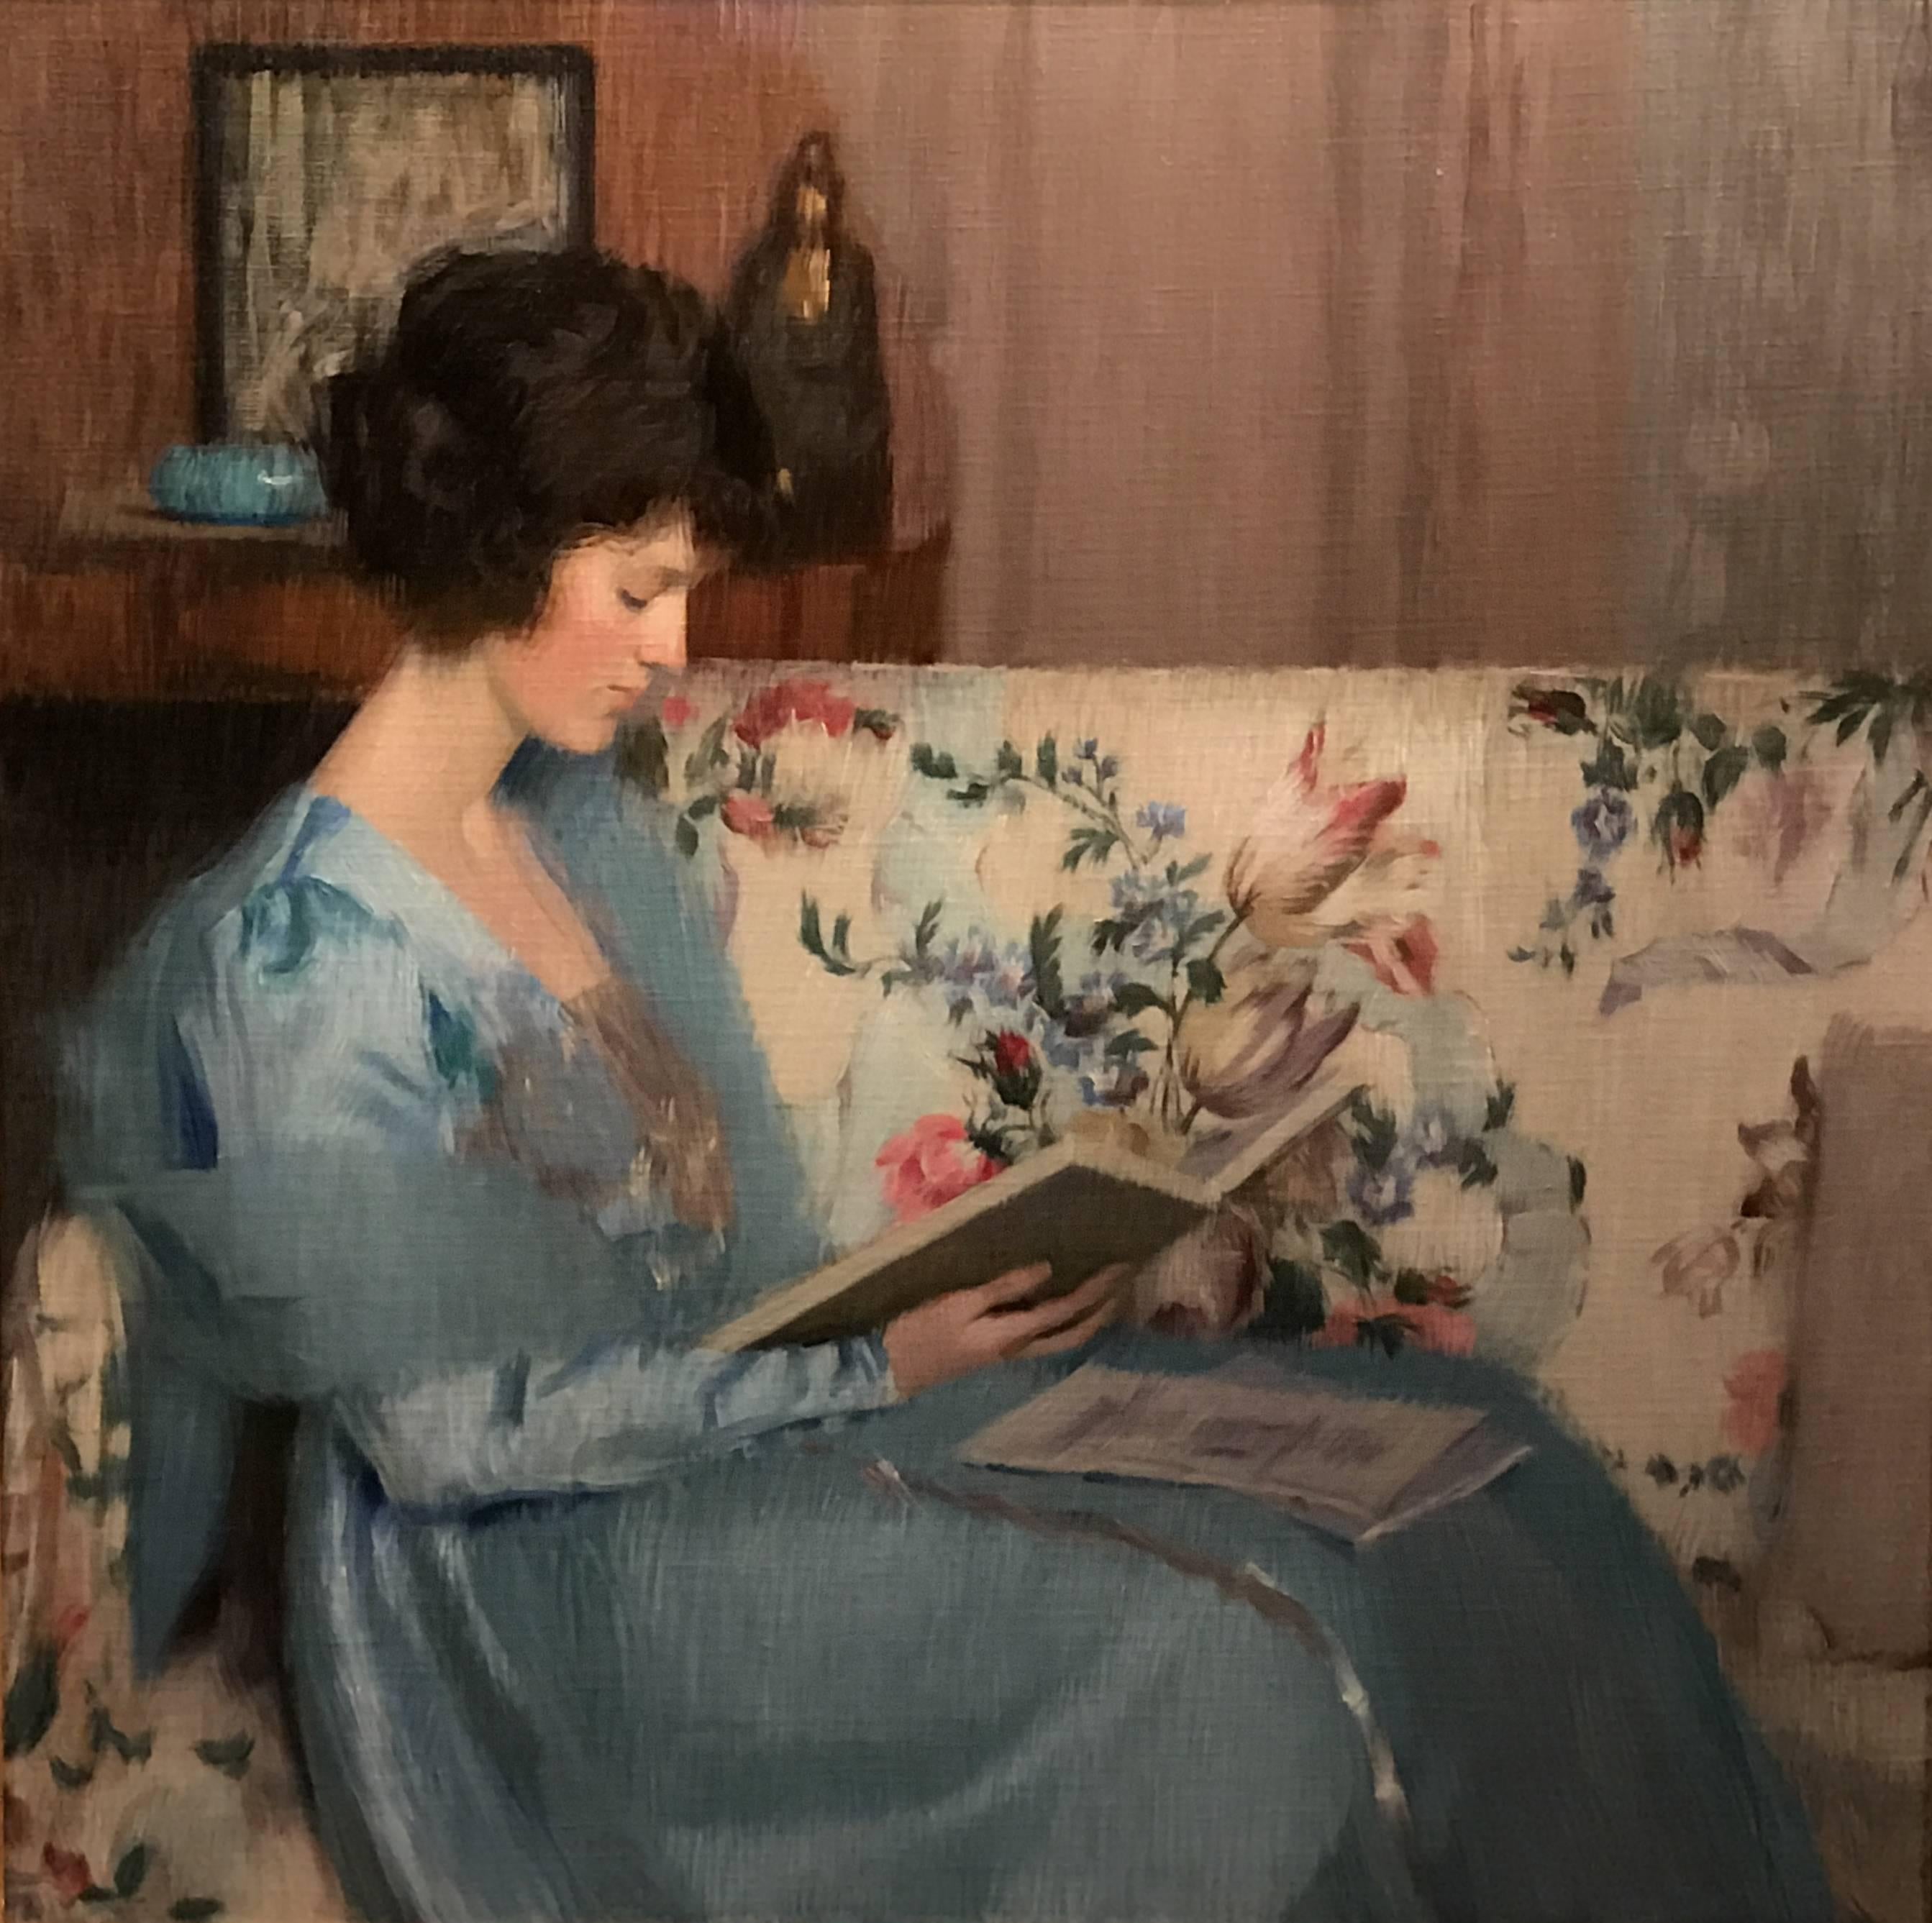 An exceptional portrait of a woman reading a book on a sofa was painted by American artist Louise Williams Jackson (1872-1939). Born in Newton, Massachusetts in 1872. She and her family moved to Minnesota when she was young, for several years, as